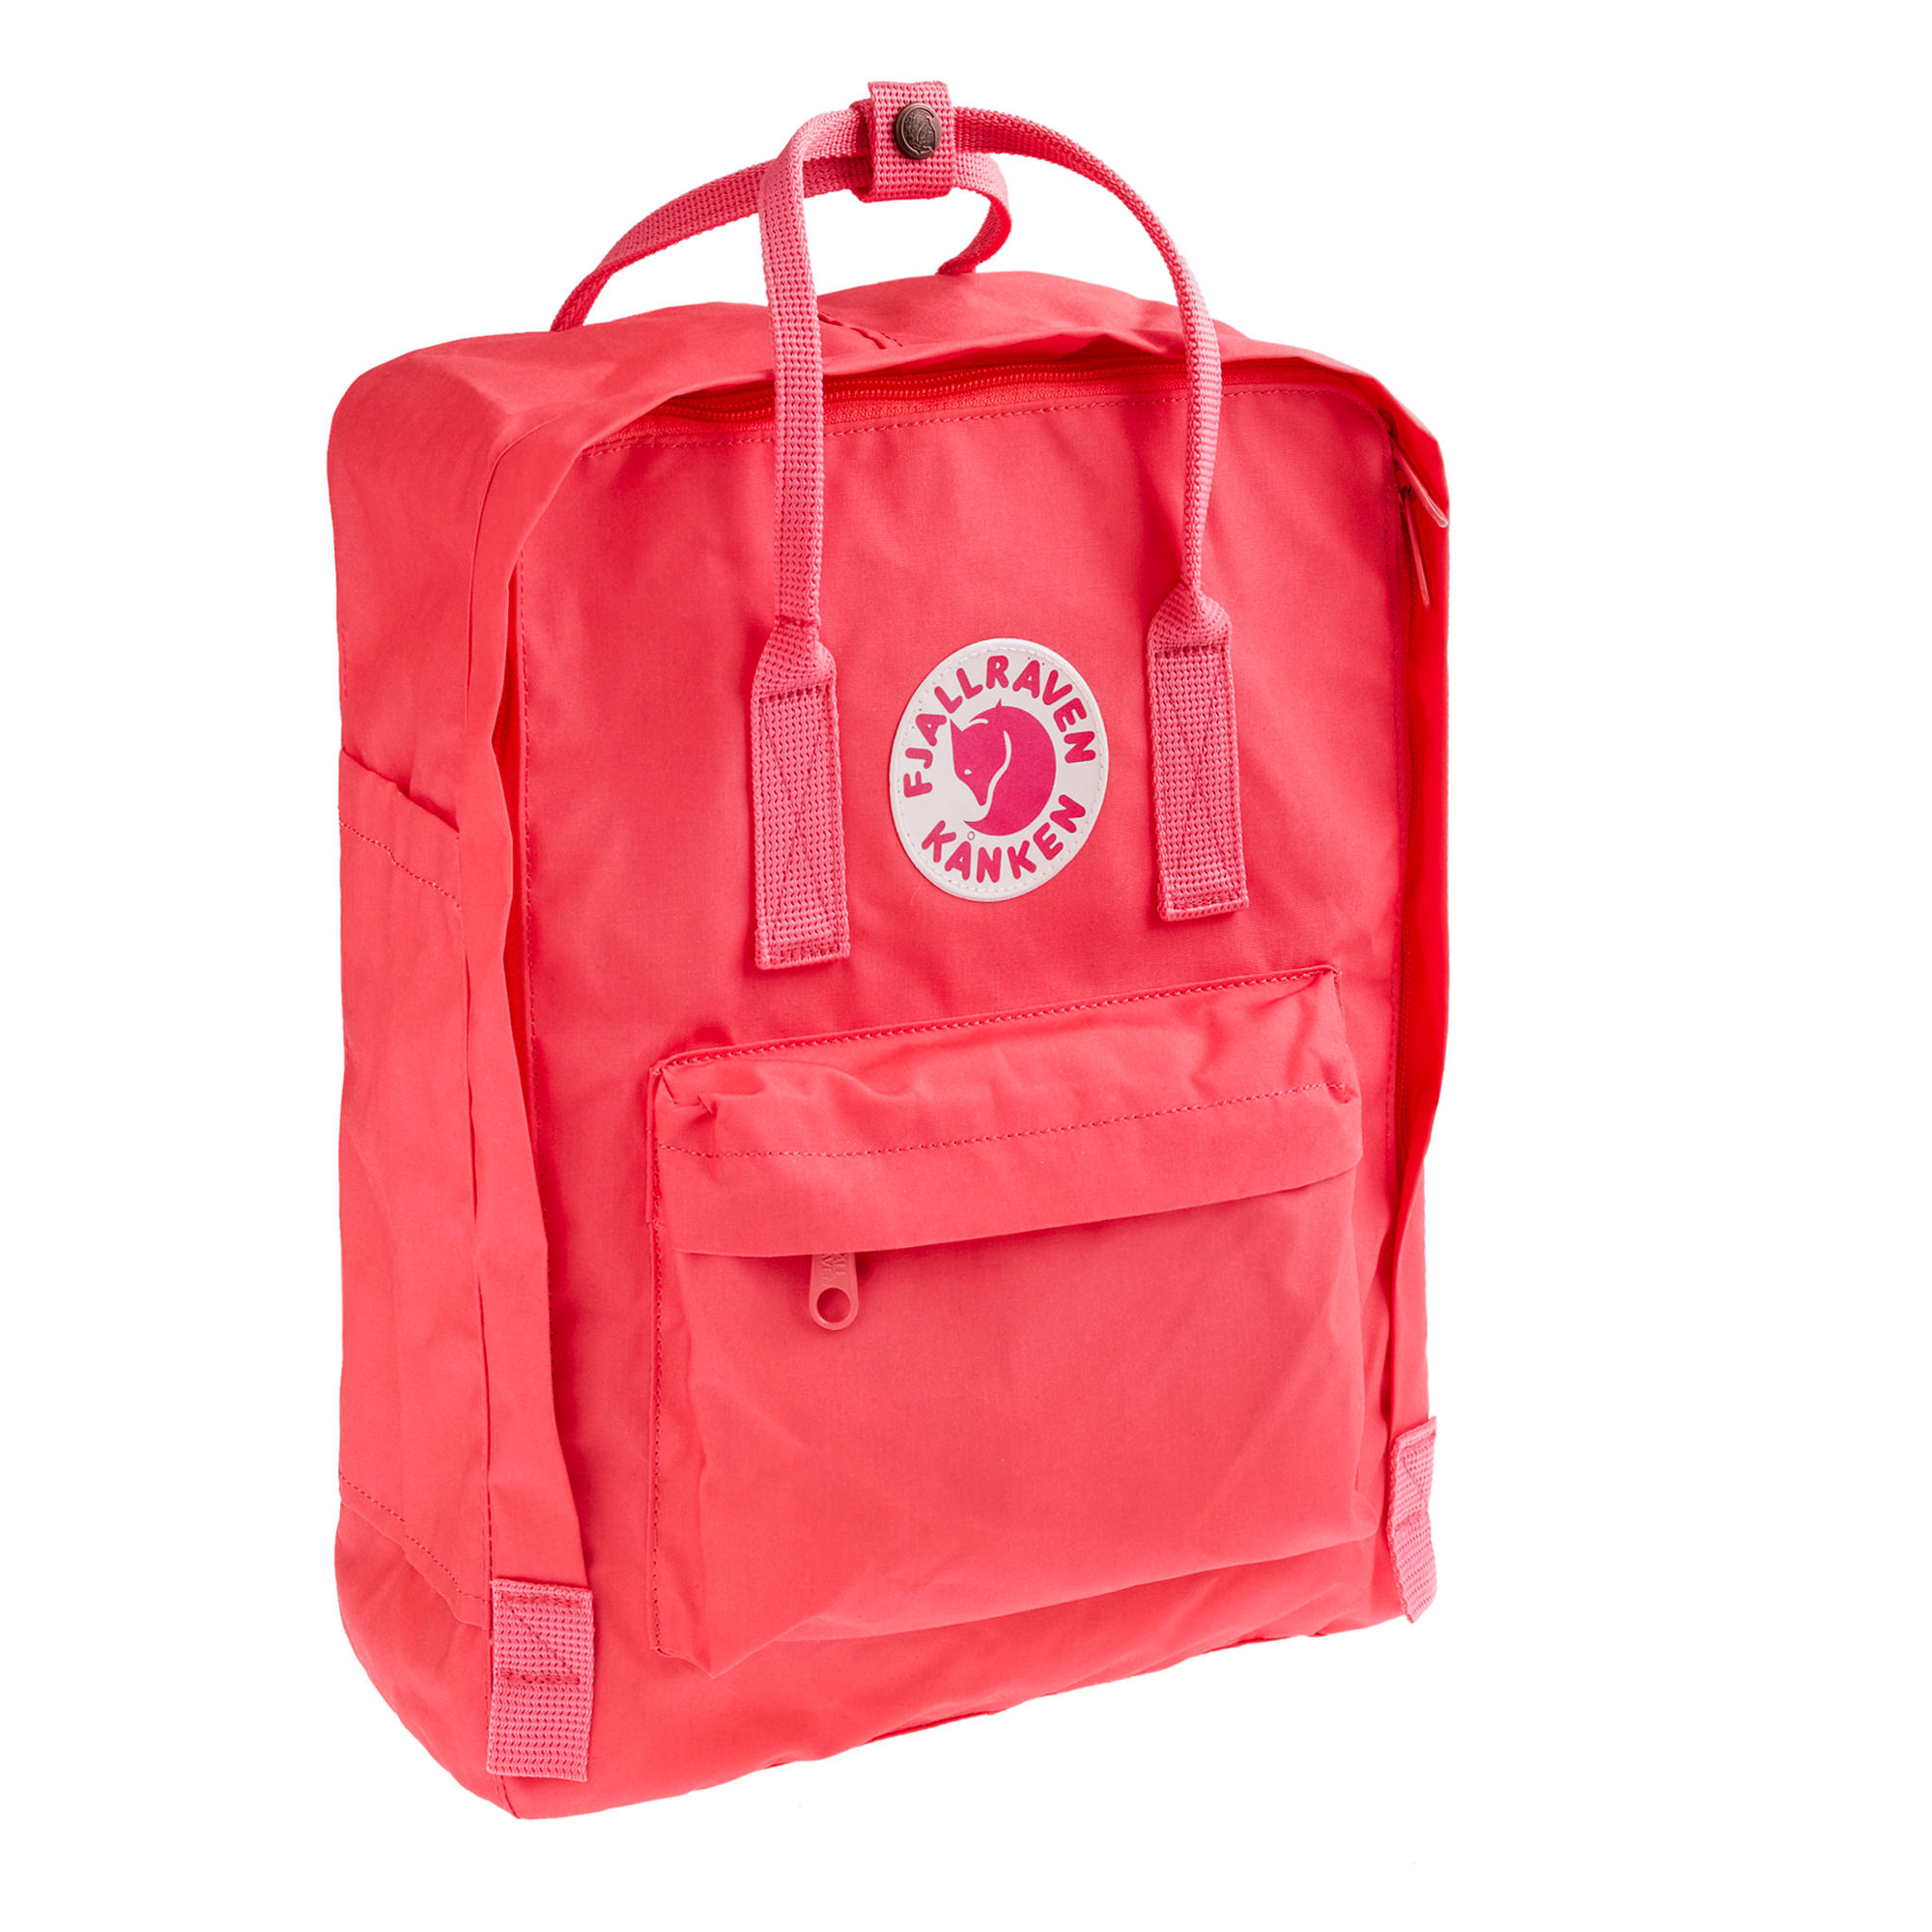 Details about   Fjallraven Kanken Classic Backpack Peach Pink 14X10in 16L Brand New Style# 23510 